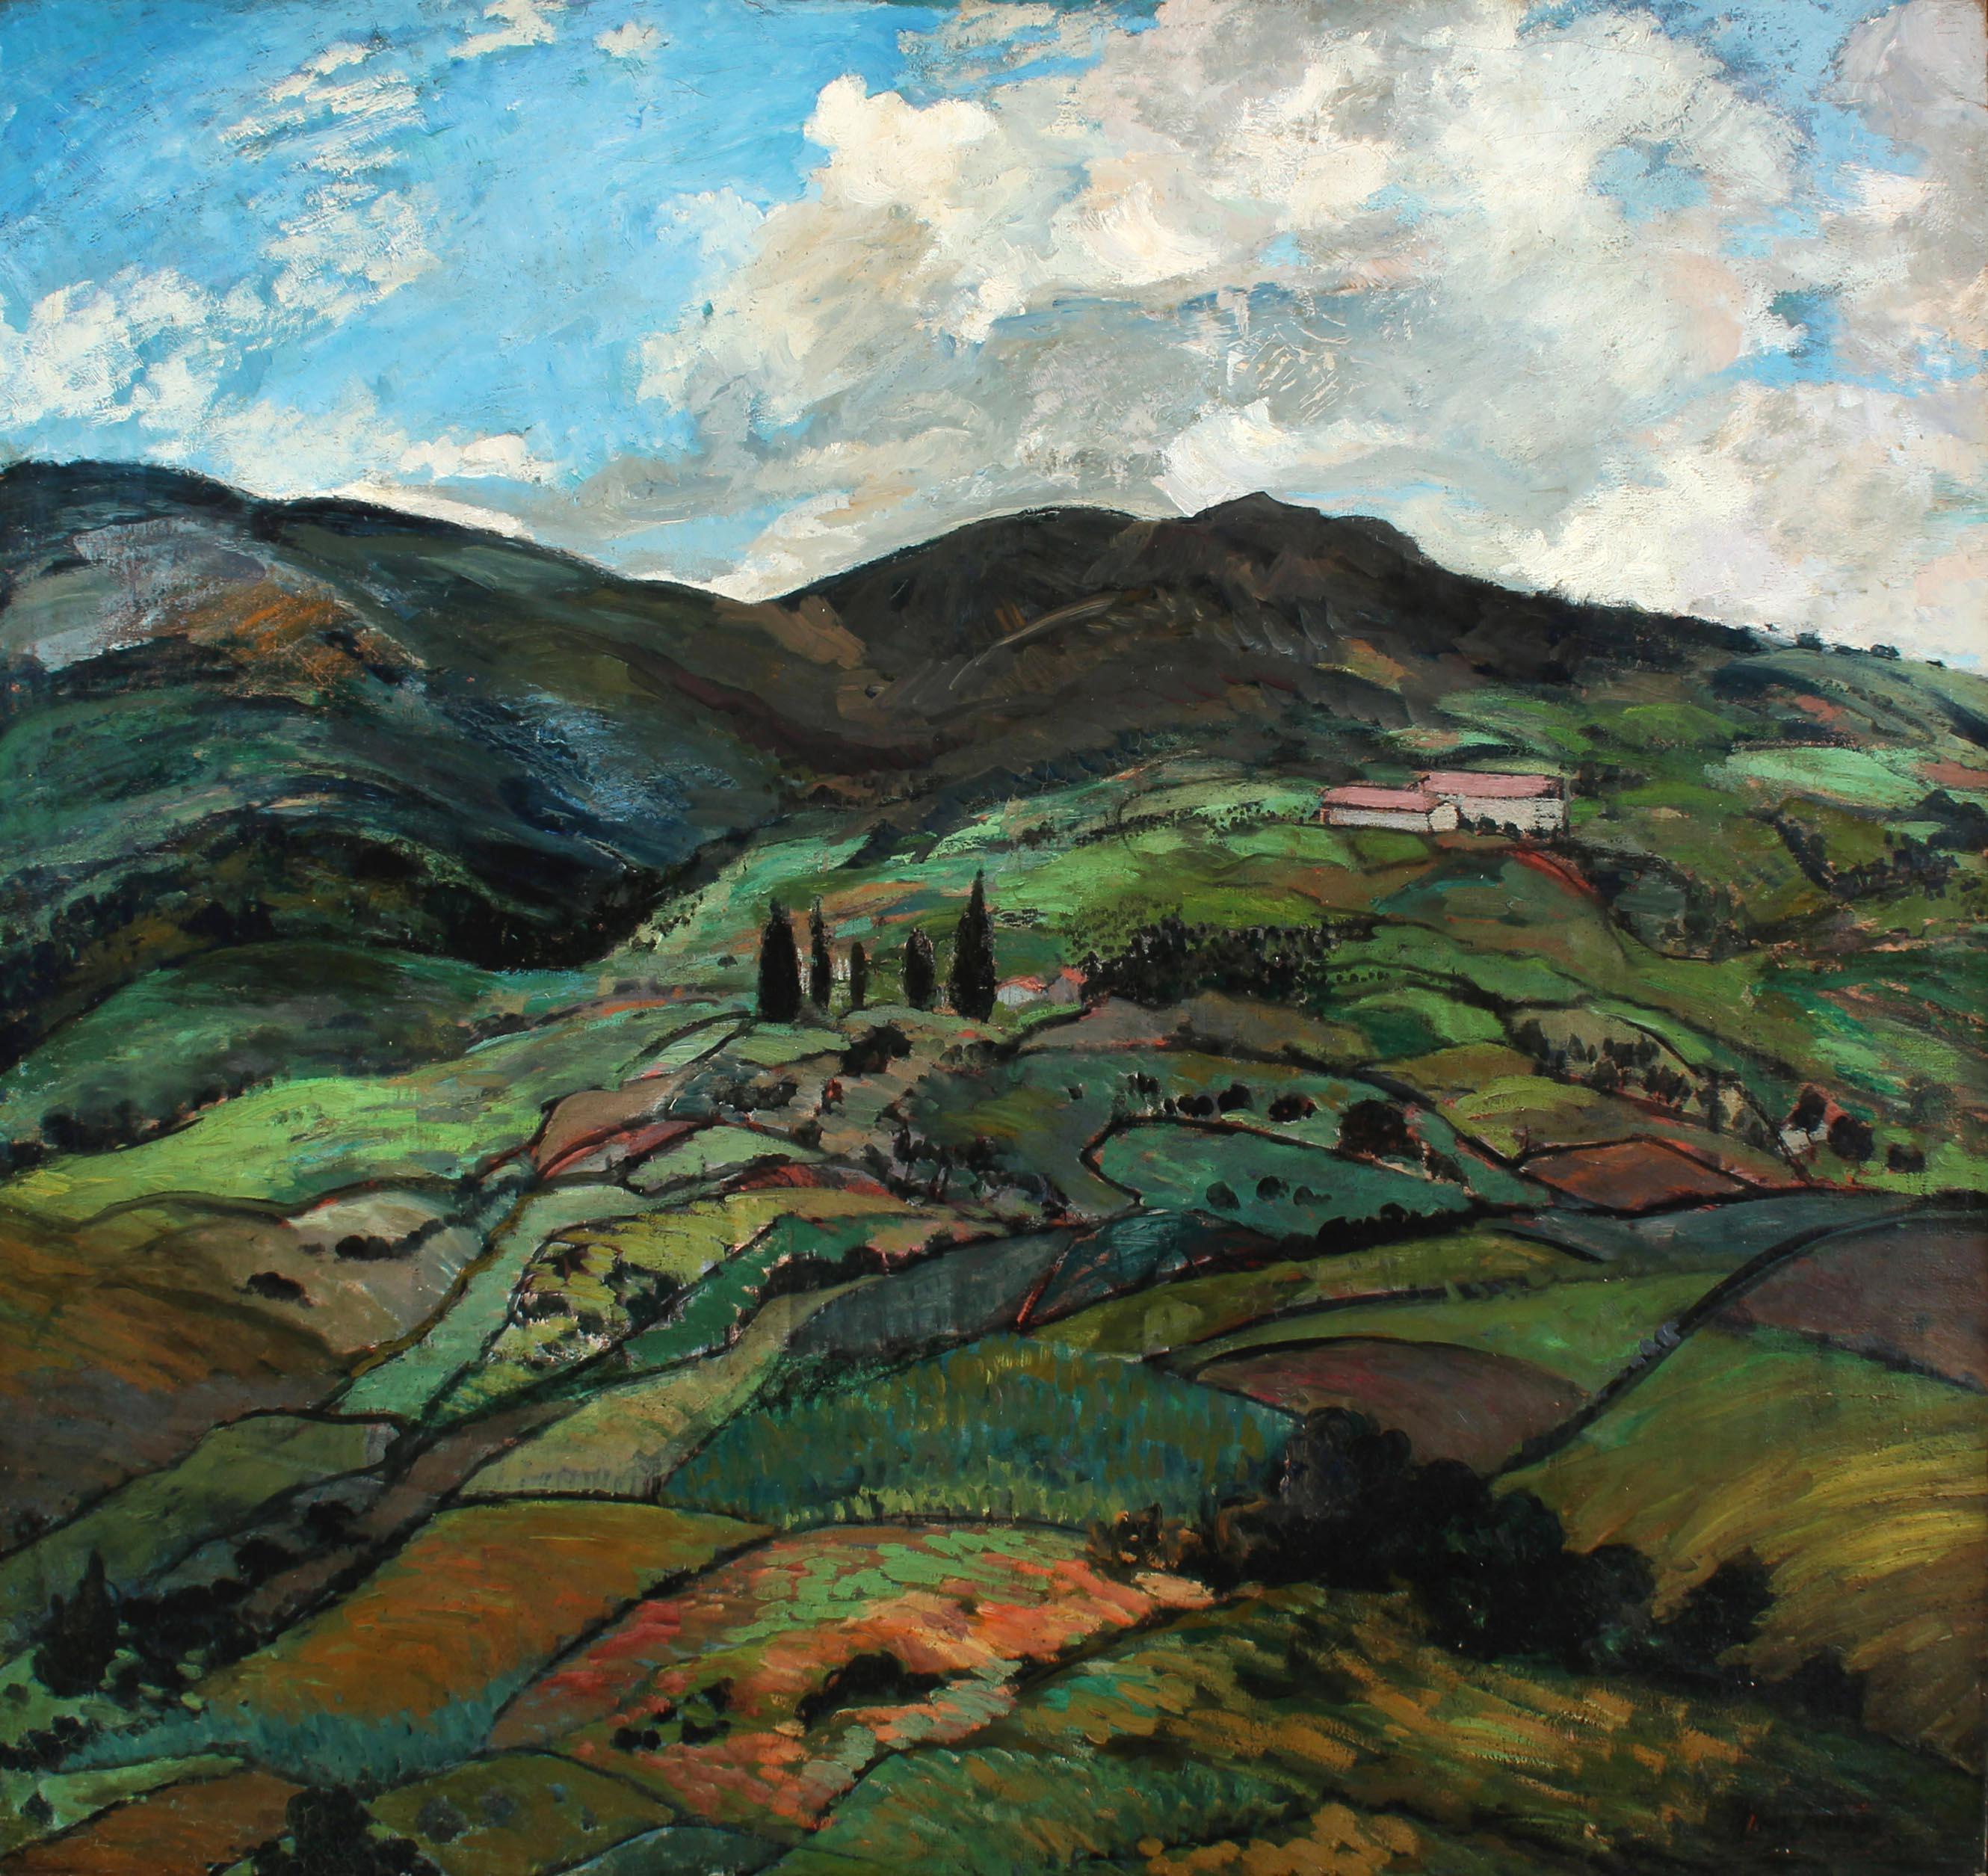 "Mountain Landscape," by American artist Alice Lolita Muth is oil on canvas and measures 45 x 47 inches. The work is signed by the artist at the lower right.

Alice Lolita Muth was born Alice Helen Muth in Cincinnati, Ohio on February 27th, 1887.